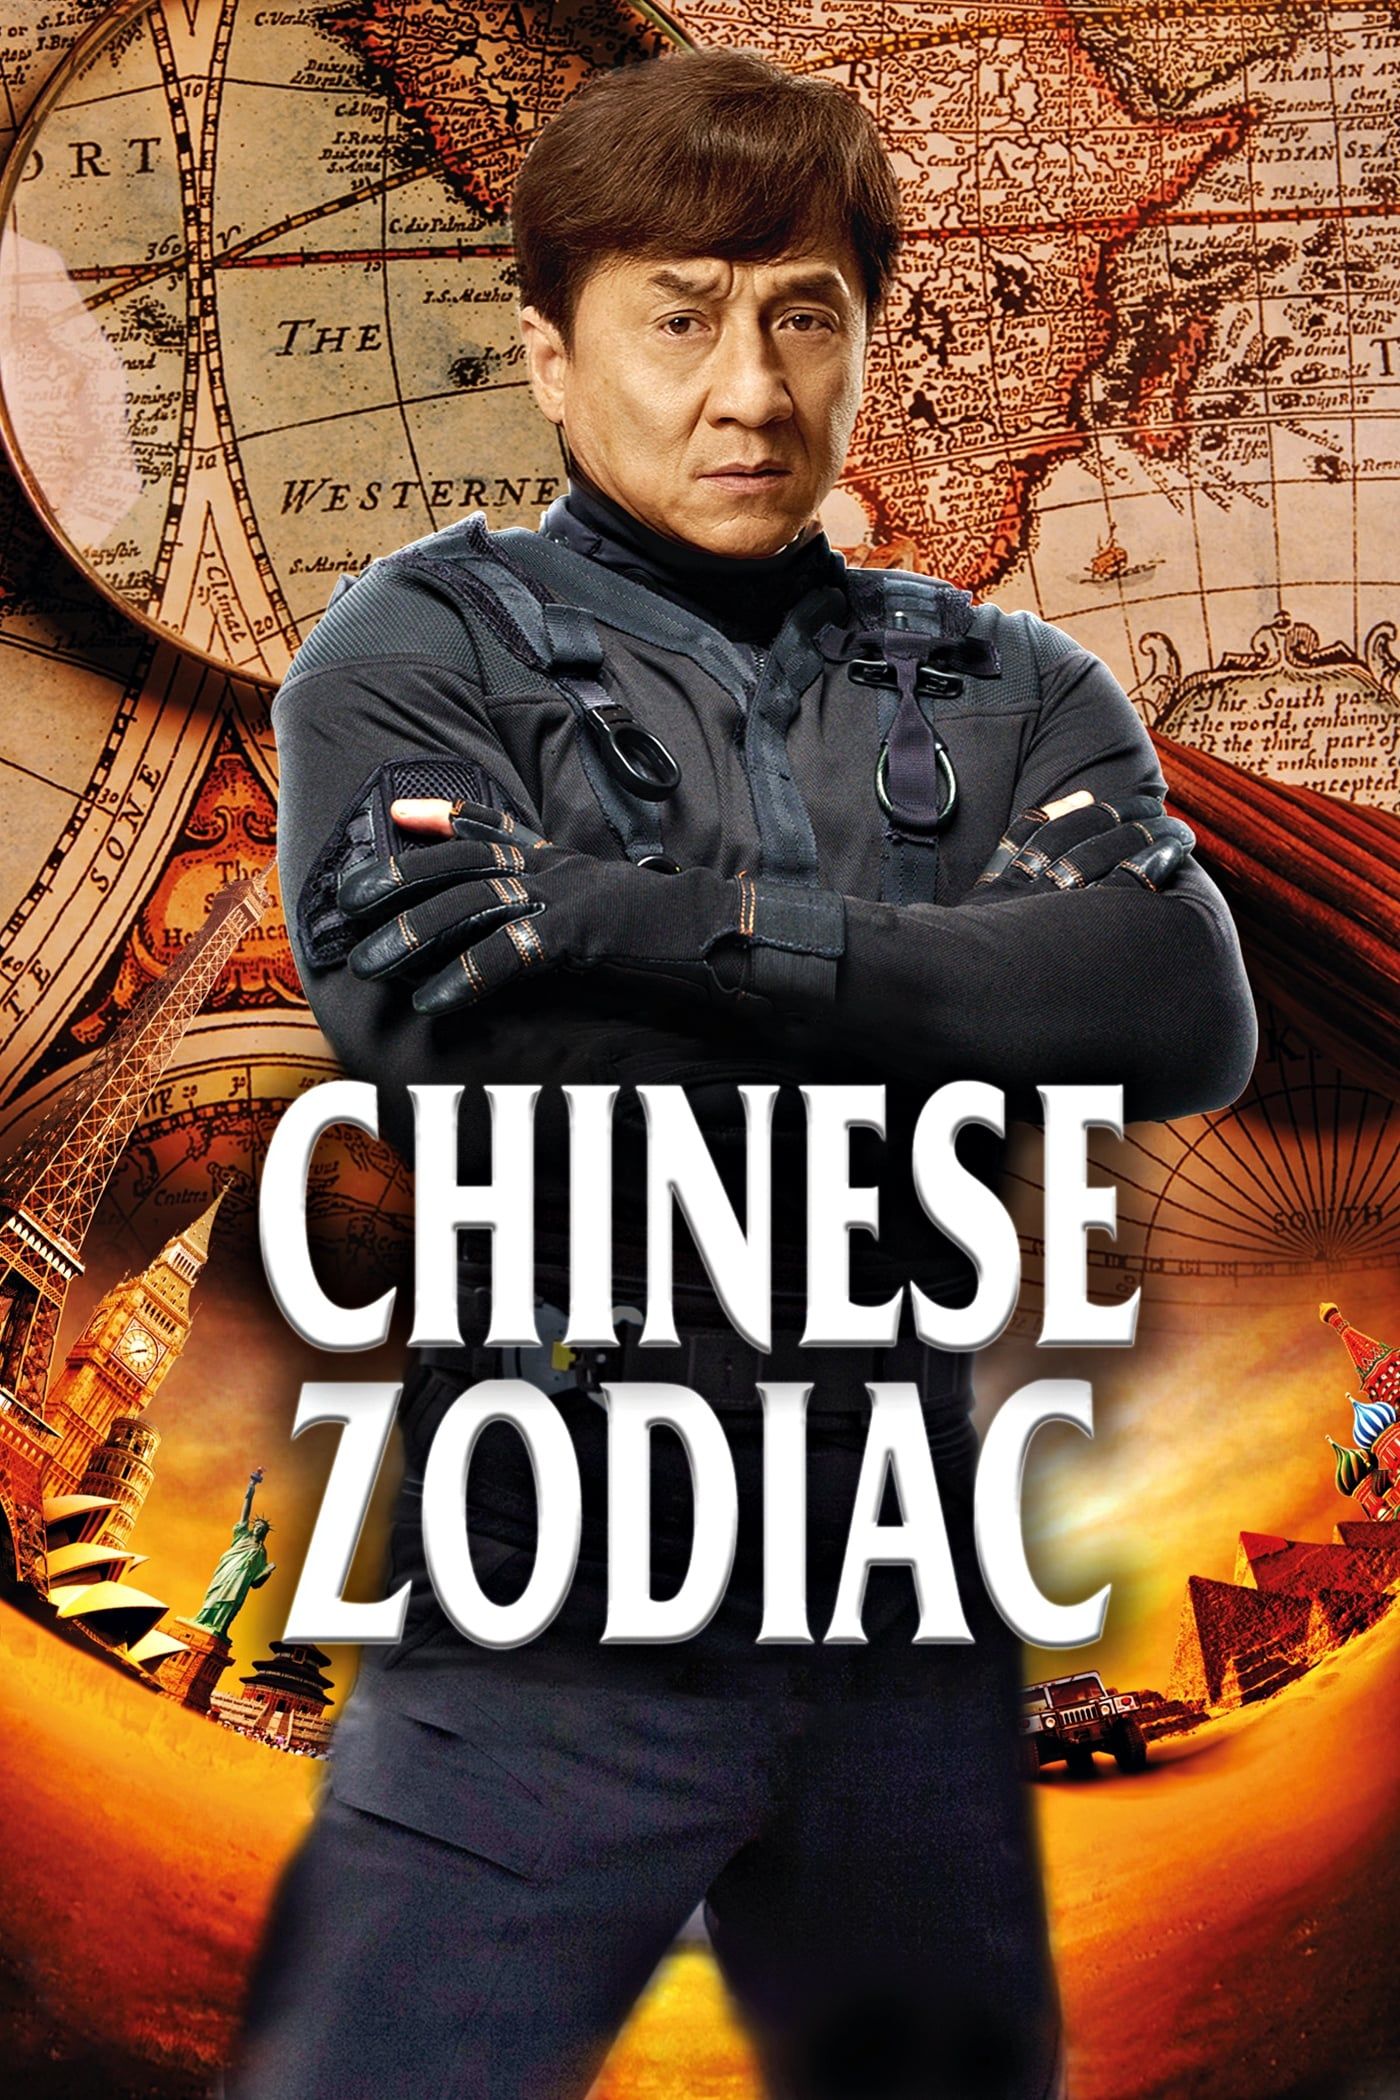 Jackie Chan on the movie poster for Chinese Zodiac (2012)